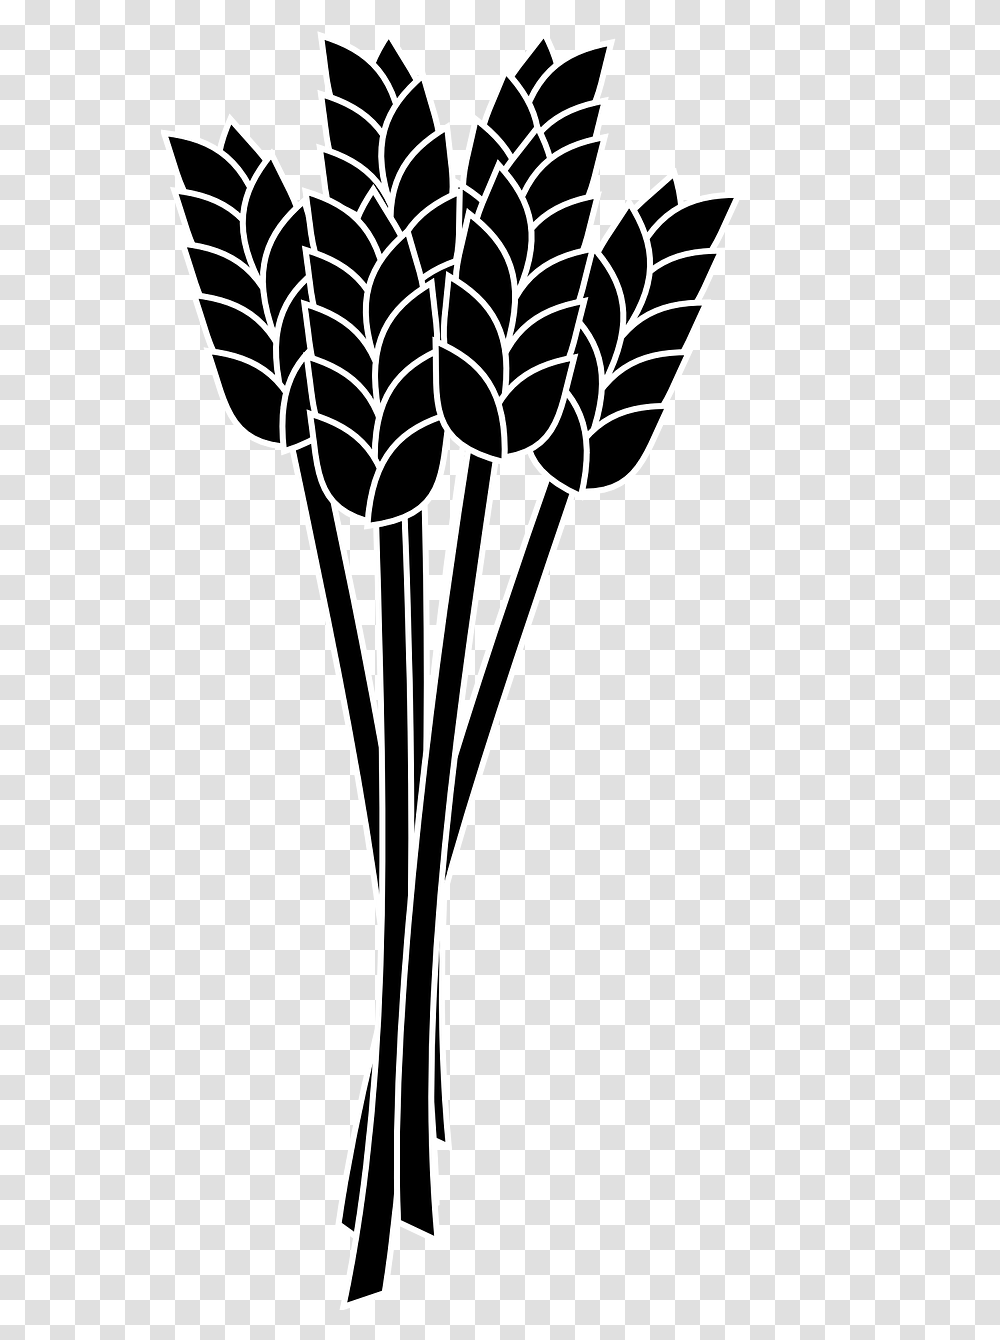 Food Wheat Spike Bunch Grain Cereal Agriculture, Flower, Plant, Blossom Transparent Png